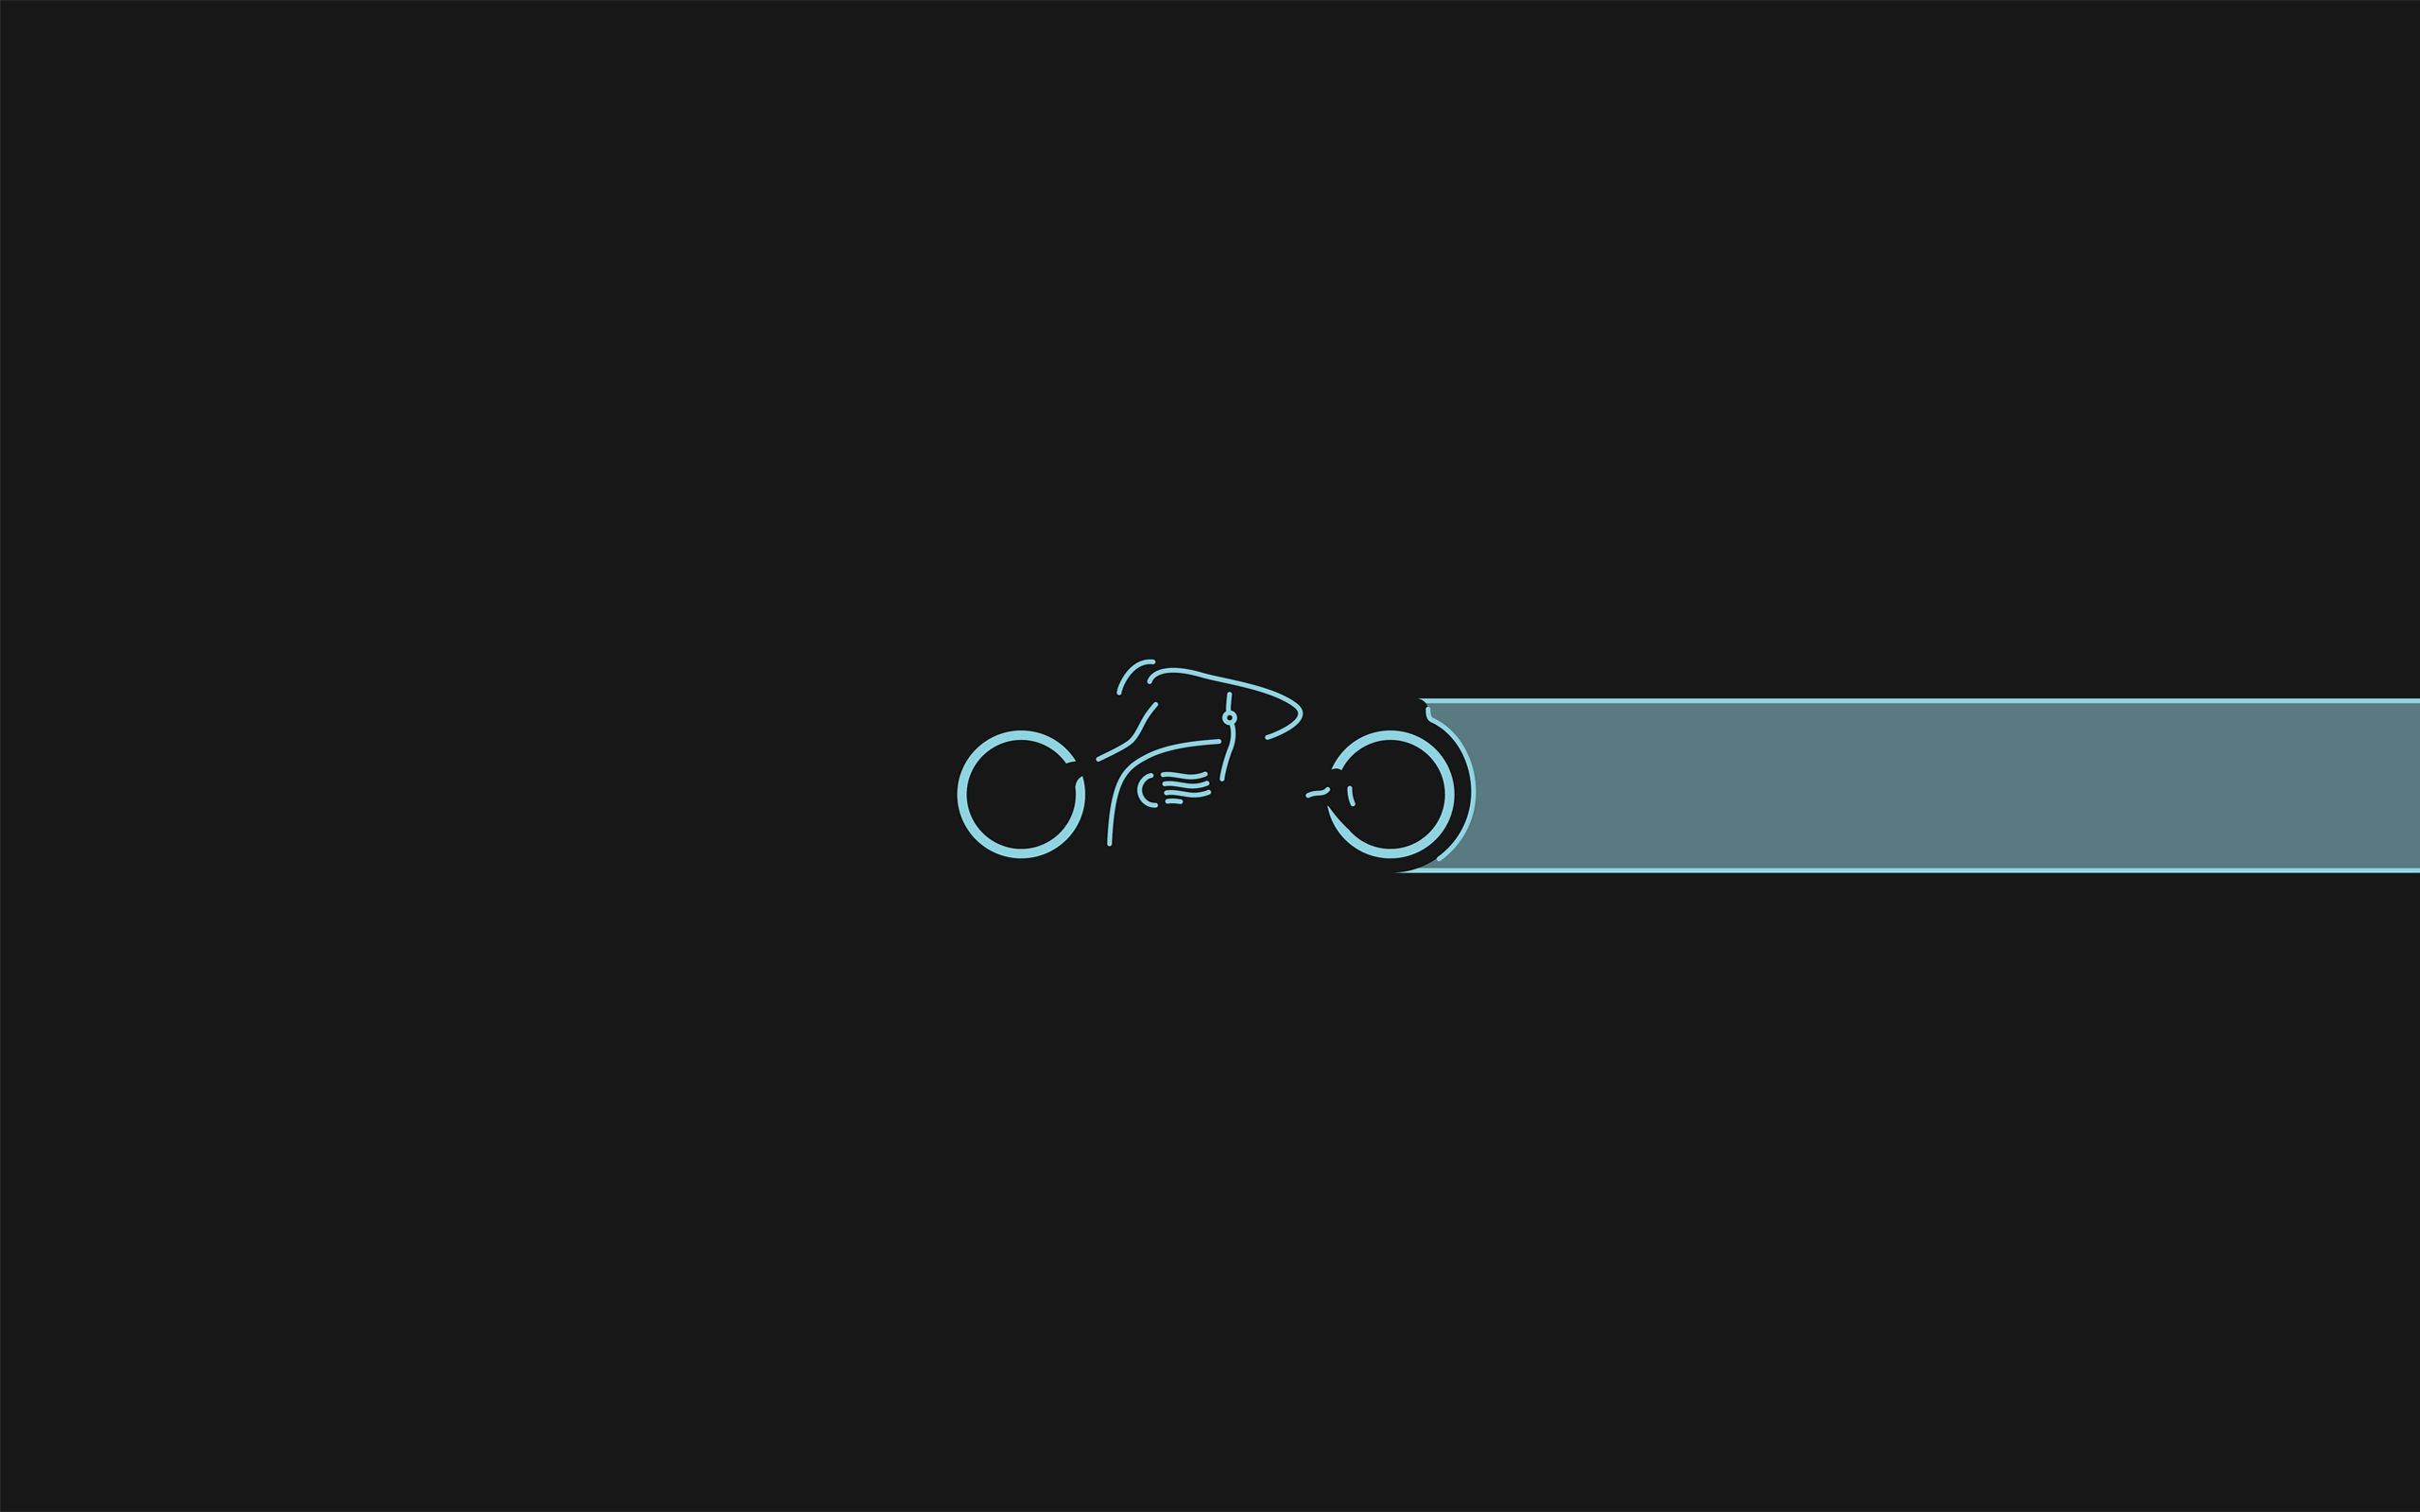 General 2560x1600 Tron: Legacy minimalism vehicle movies black background science fiction simple background